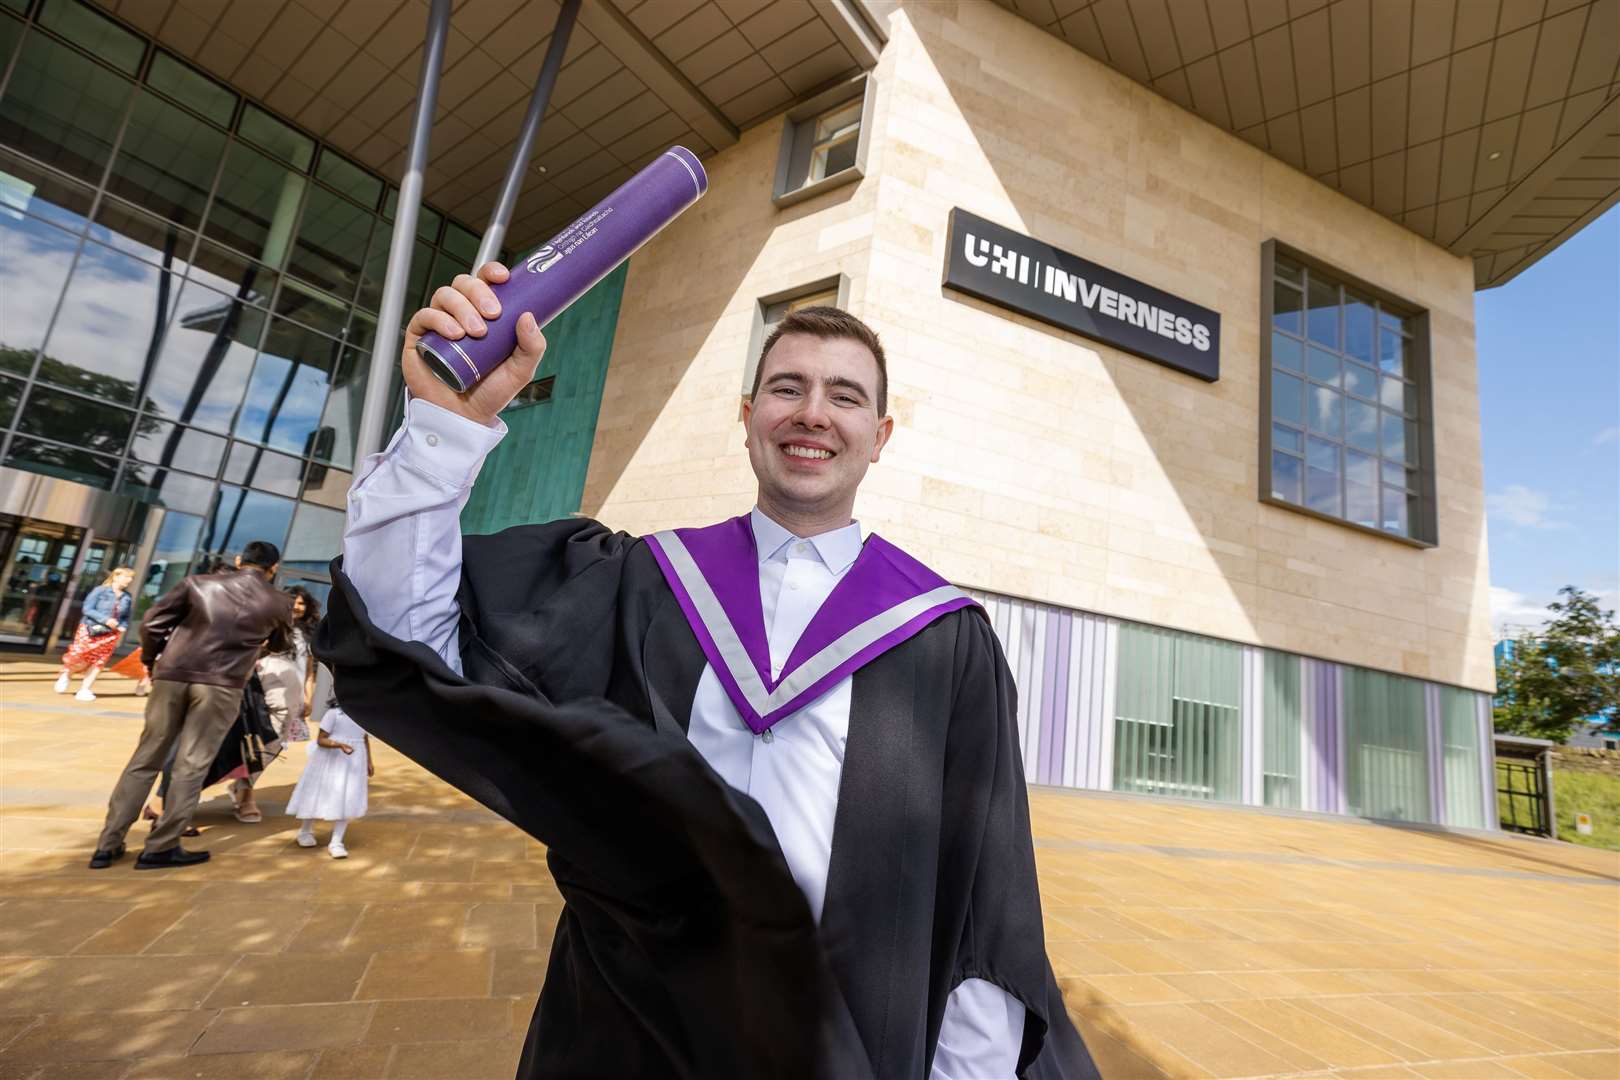 David Laszkiewicz of Inverness graduated with BA (Hons) Business Management with Marketing in 2020 and now works in digital marketing.